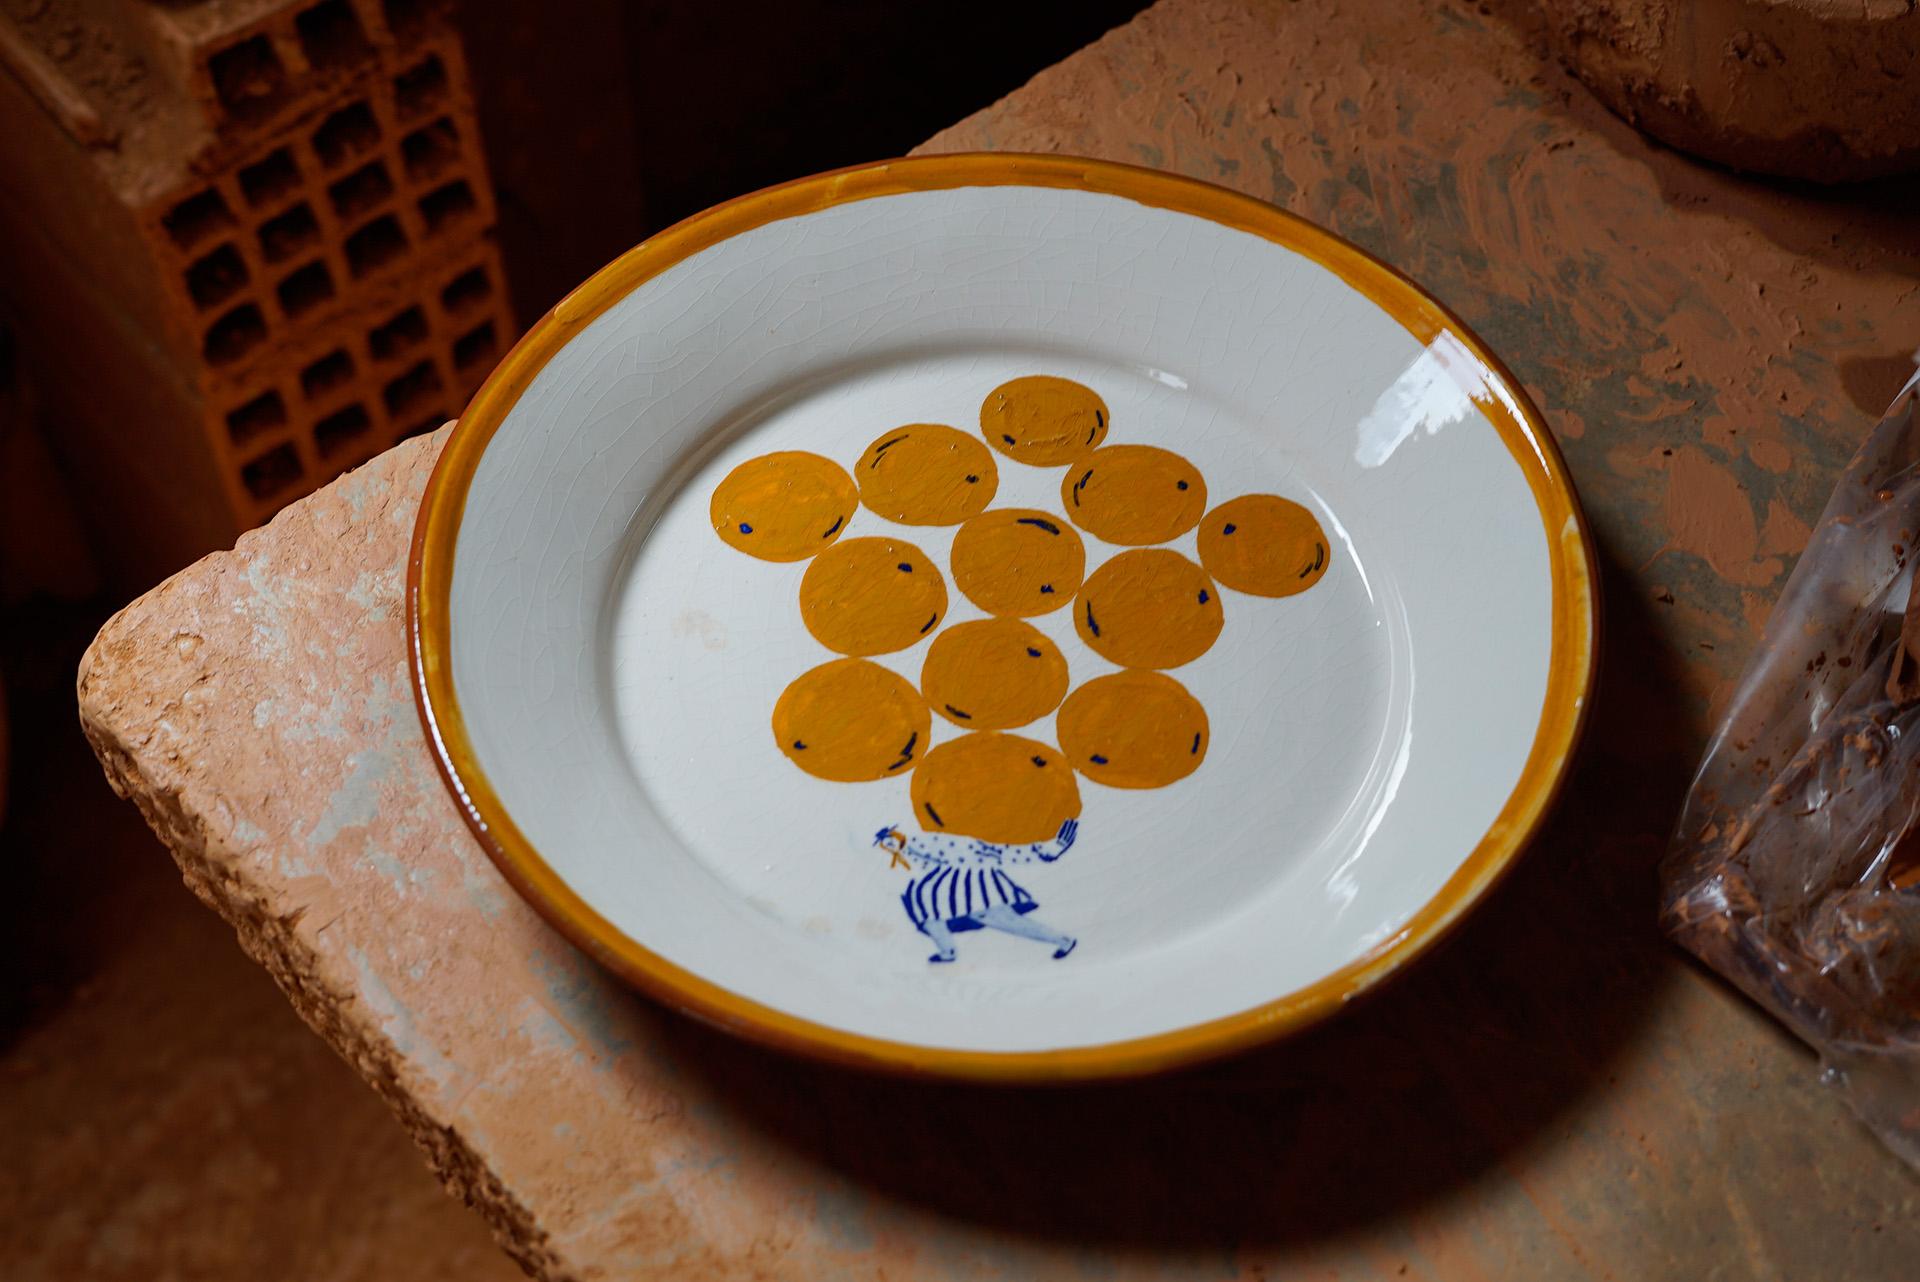 Ameixas is a terracotta decorative plate illustrated by Mariana, a miserável at Viana do Alentejo residency. Four Portuguese illustrators under the artistic direction of Vicara have been invited to work in Viana do Alentejo with the Feliciano